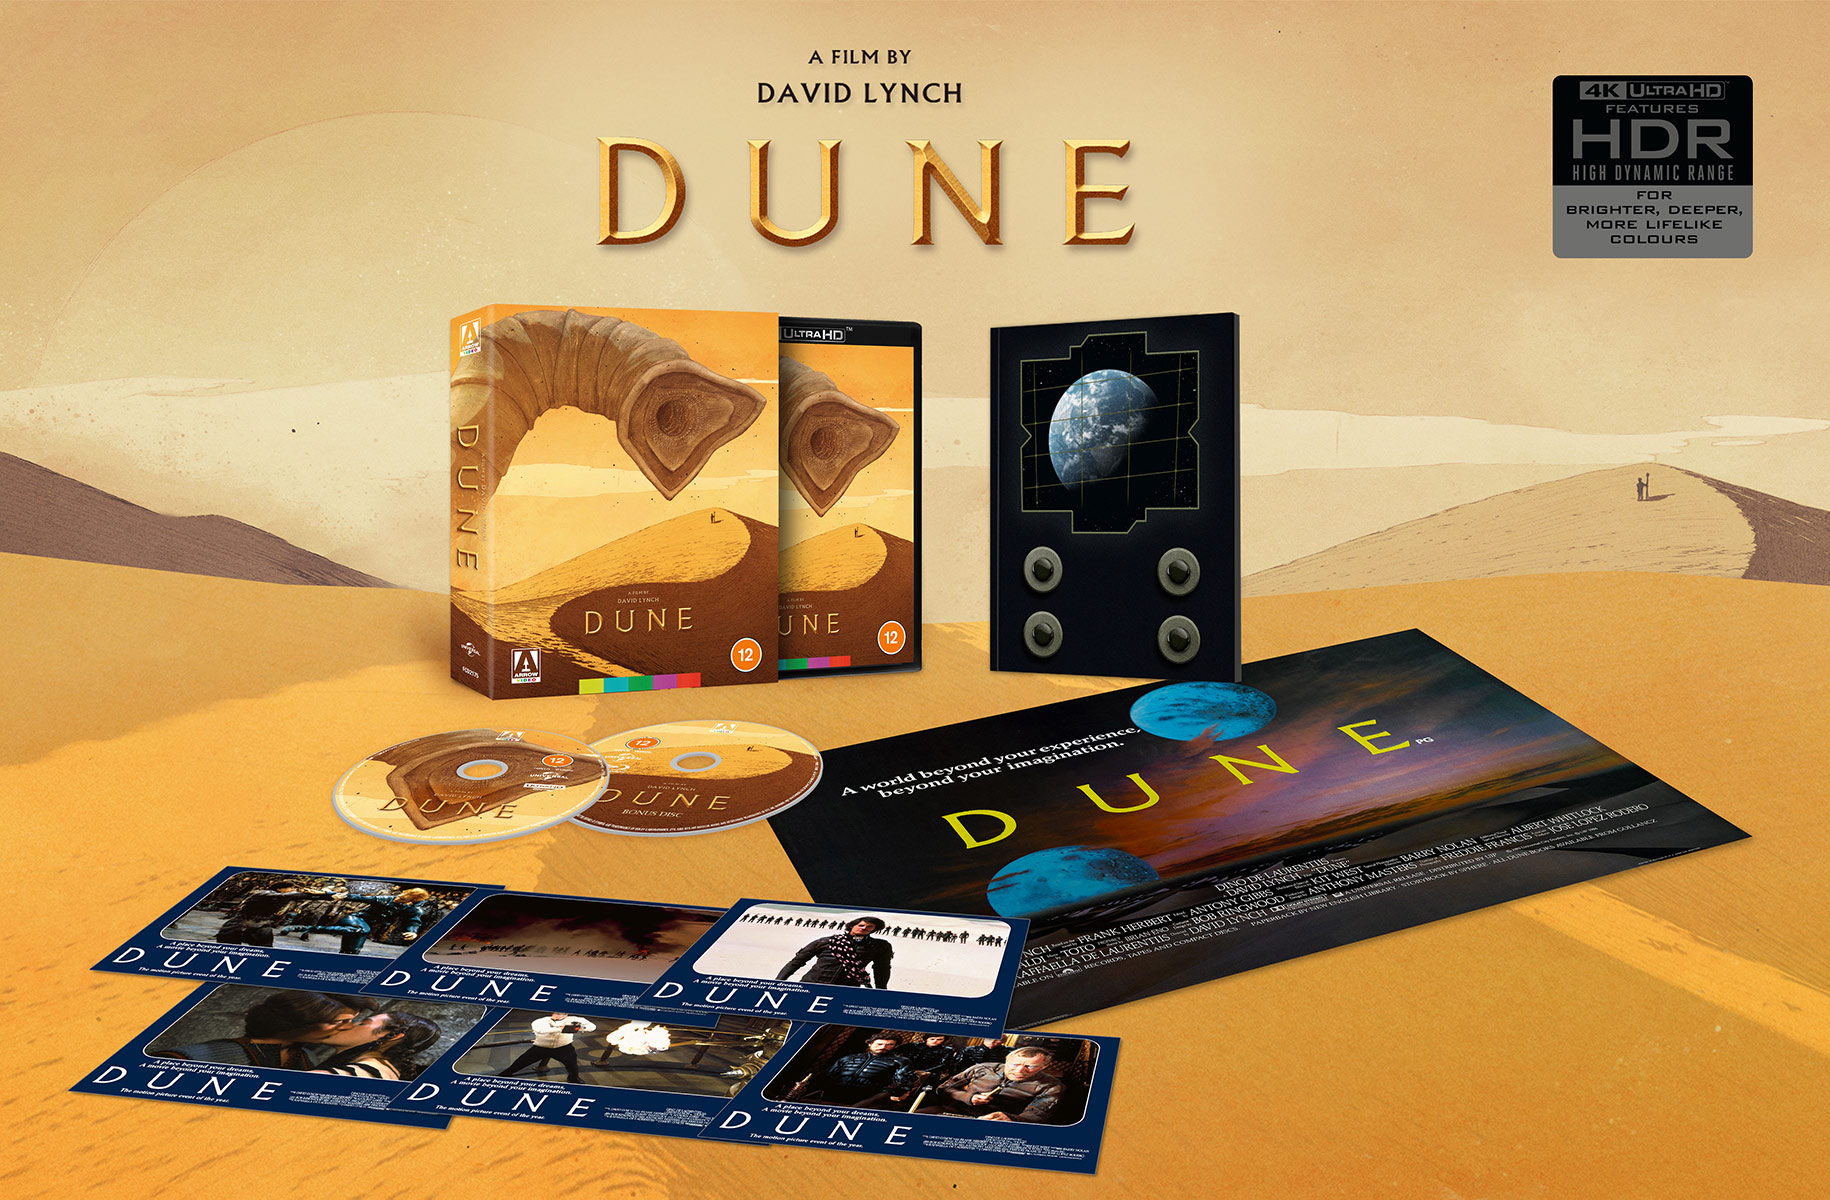 Dune (1984) 4K UHD limited edition set, including extras, from Arrow Films.